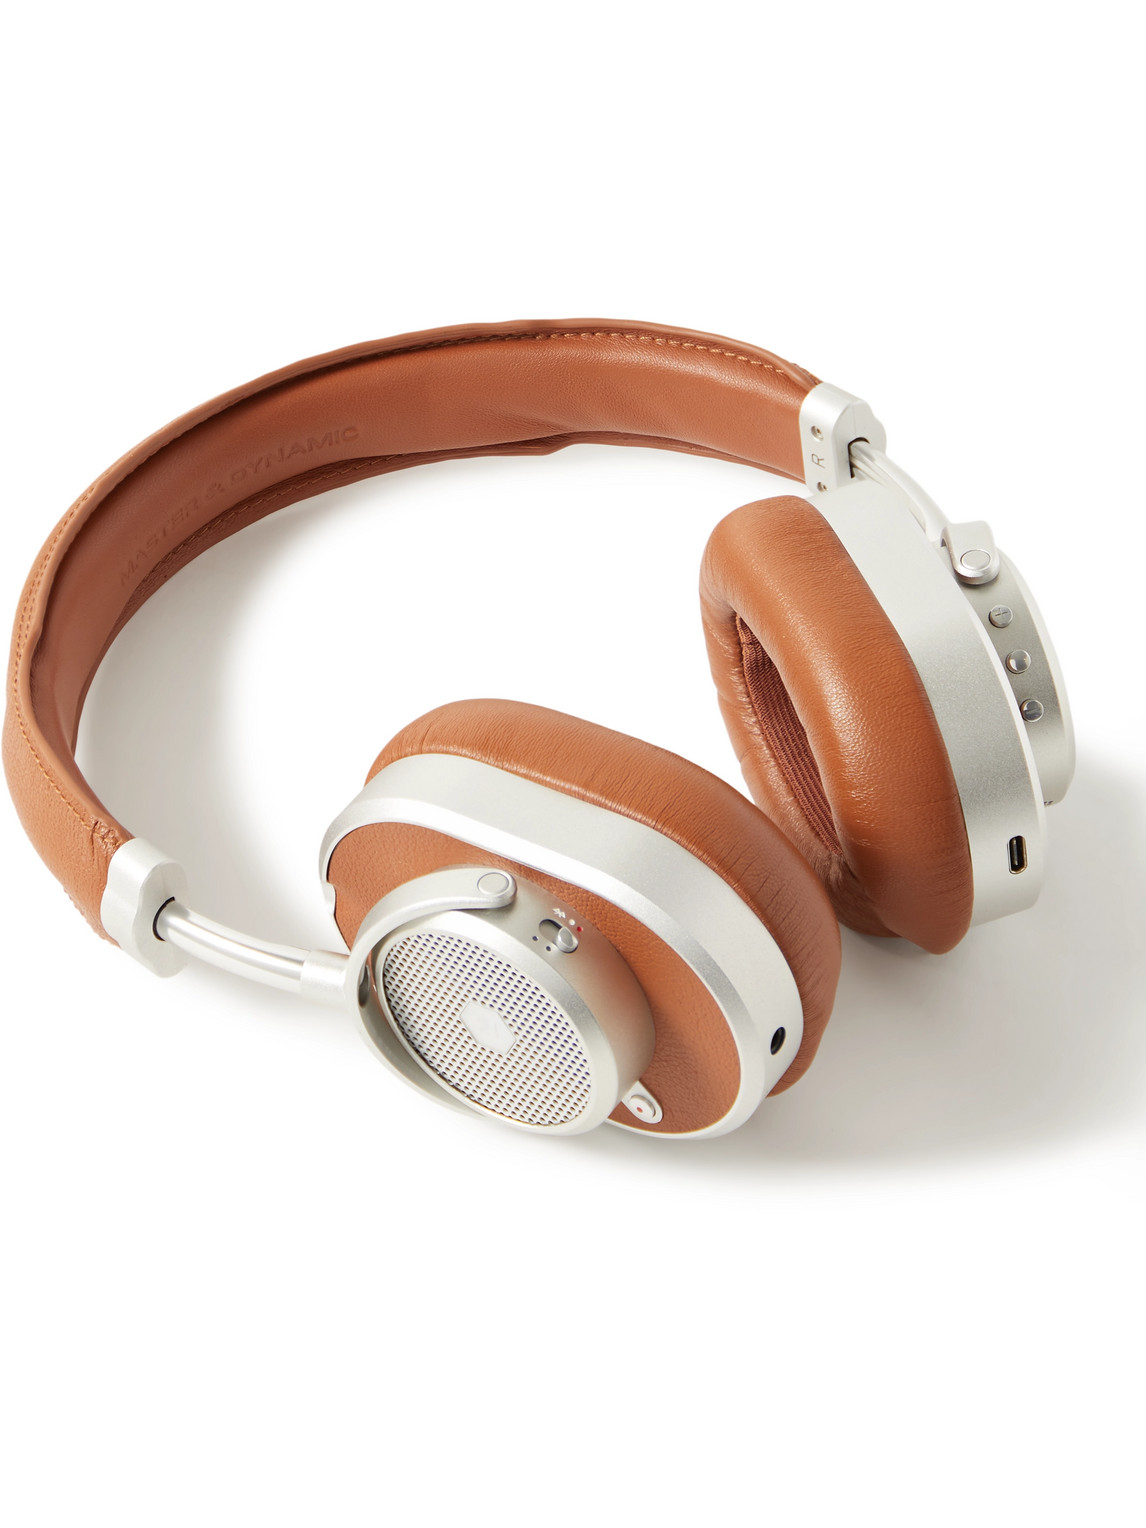 MASTER & DYNAMIC MW65 WIRELESS LEATHER OVER-EAR HEADPHONES